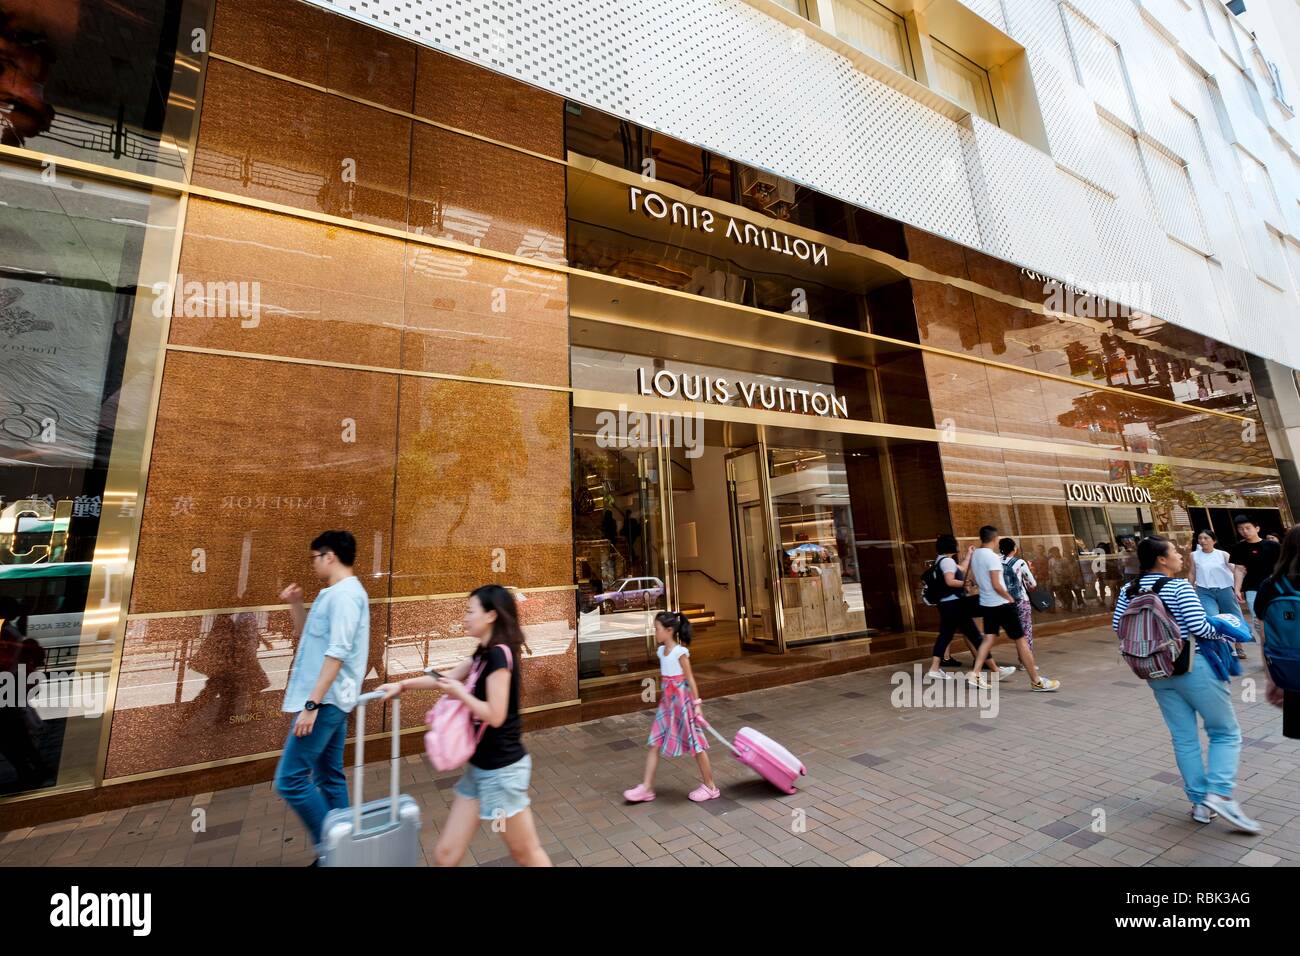 Travel Photo of The Week -- Louis Vuitton Store, Hong Kong: Then and Now